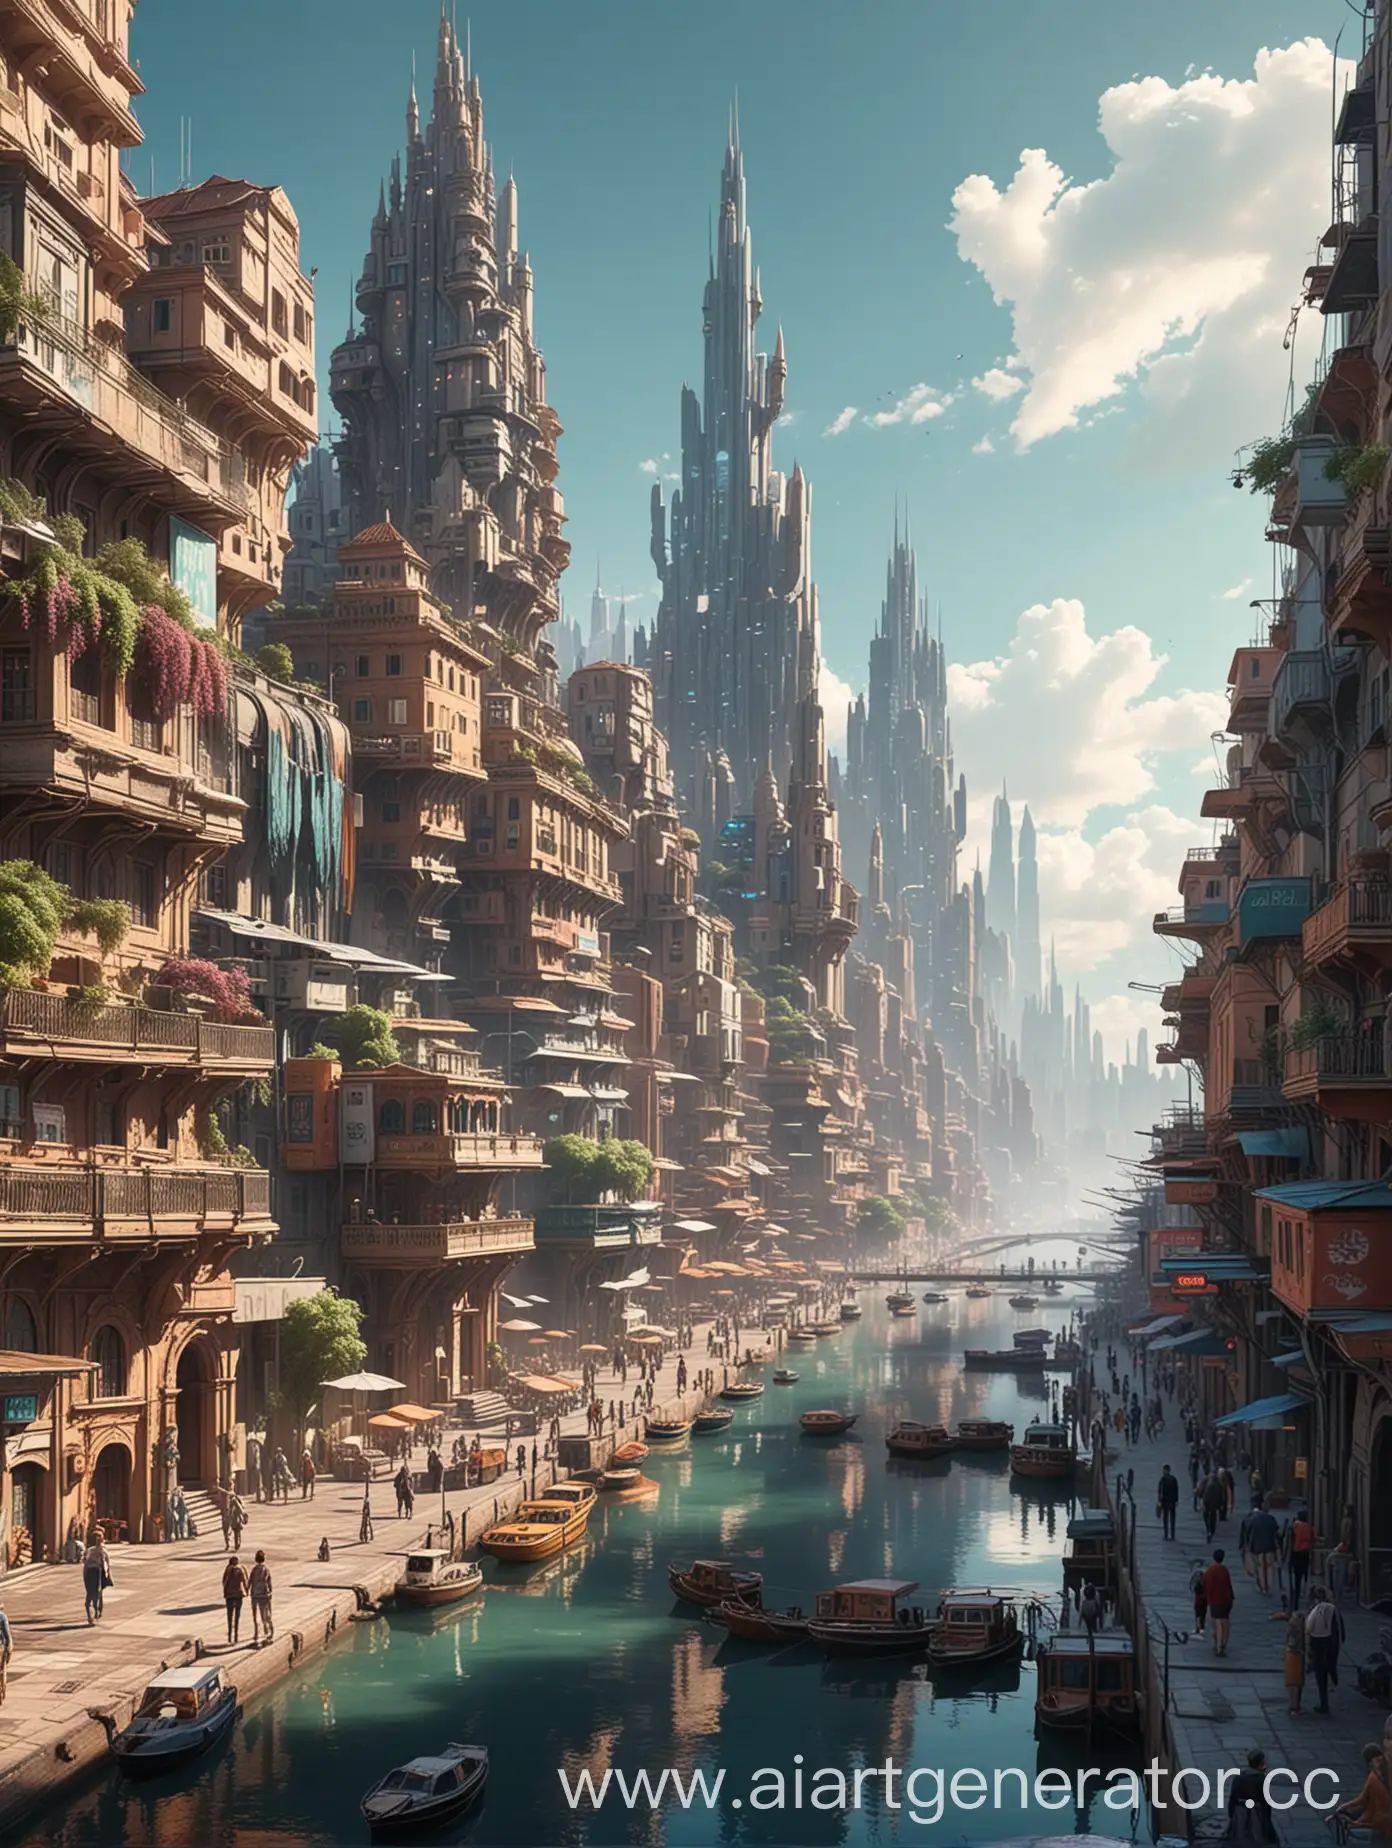 City-Miass-in-1000-Years-Vision-of-an-Ideal-Future-Metropolis-in-Stunning-8K-Quality